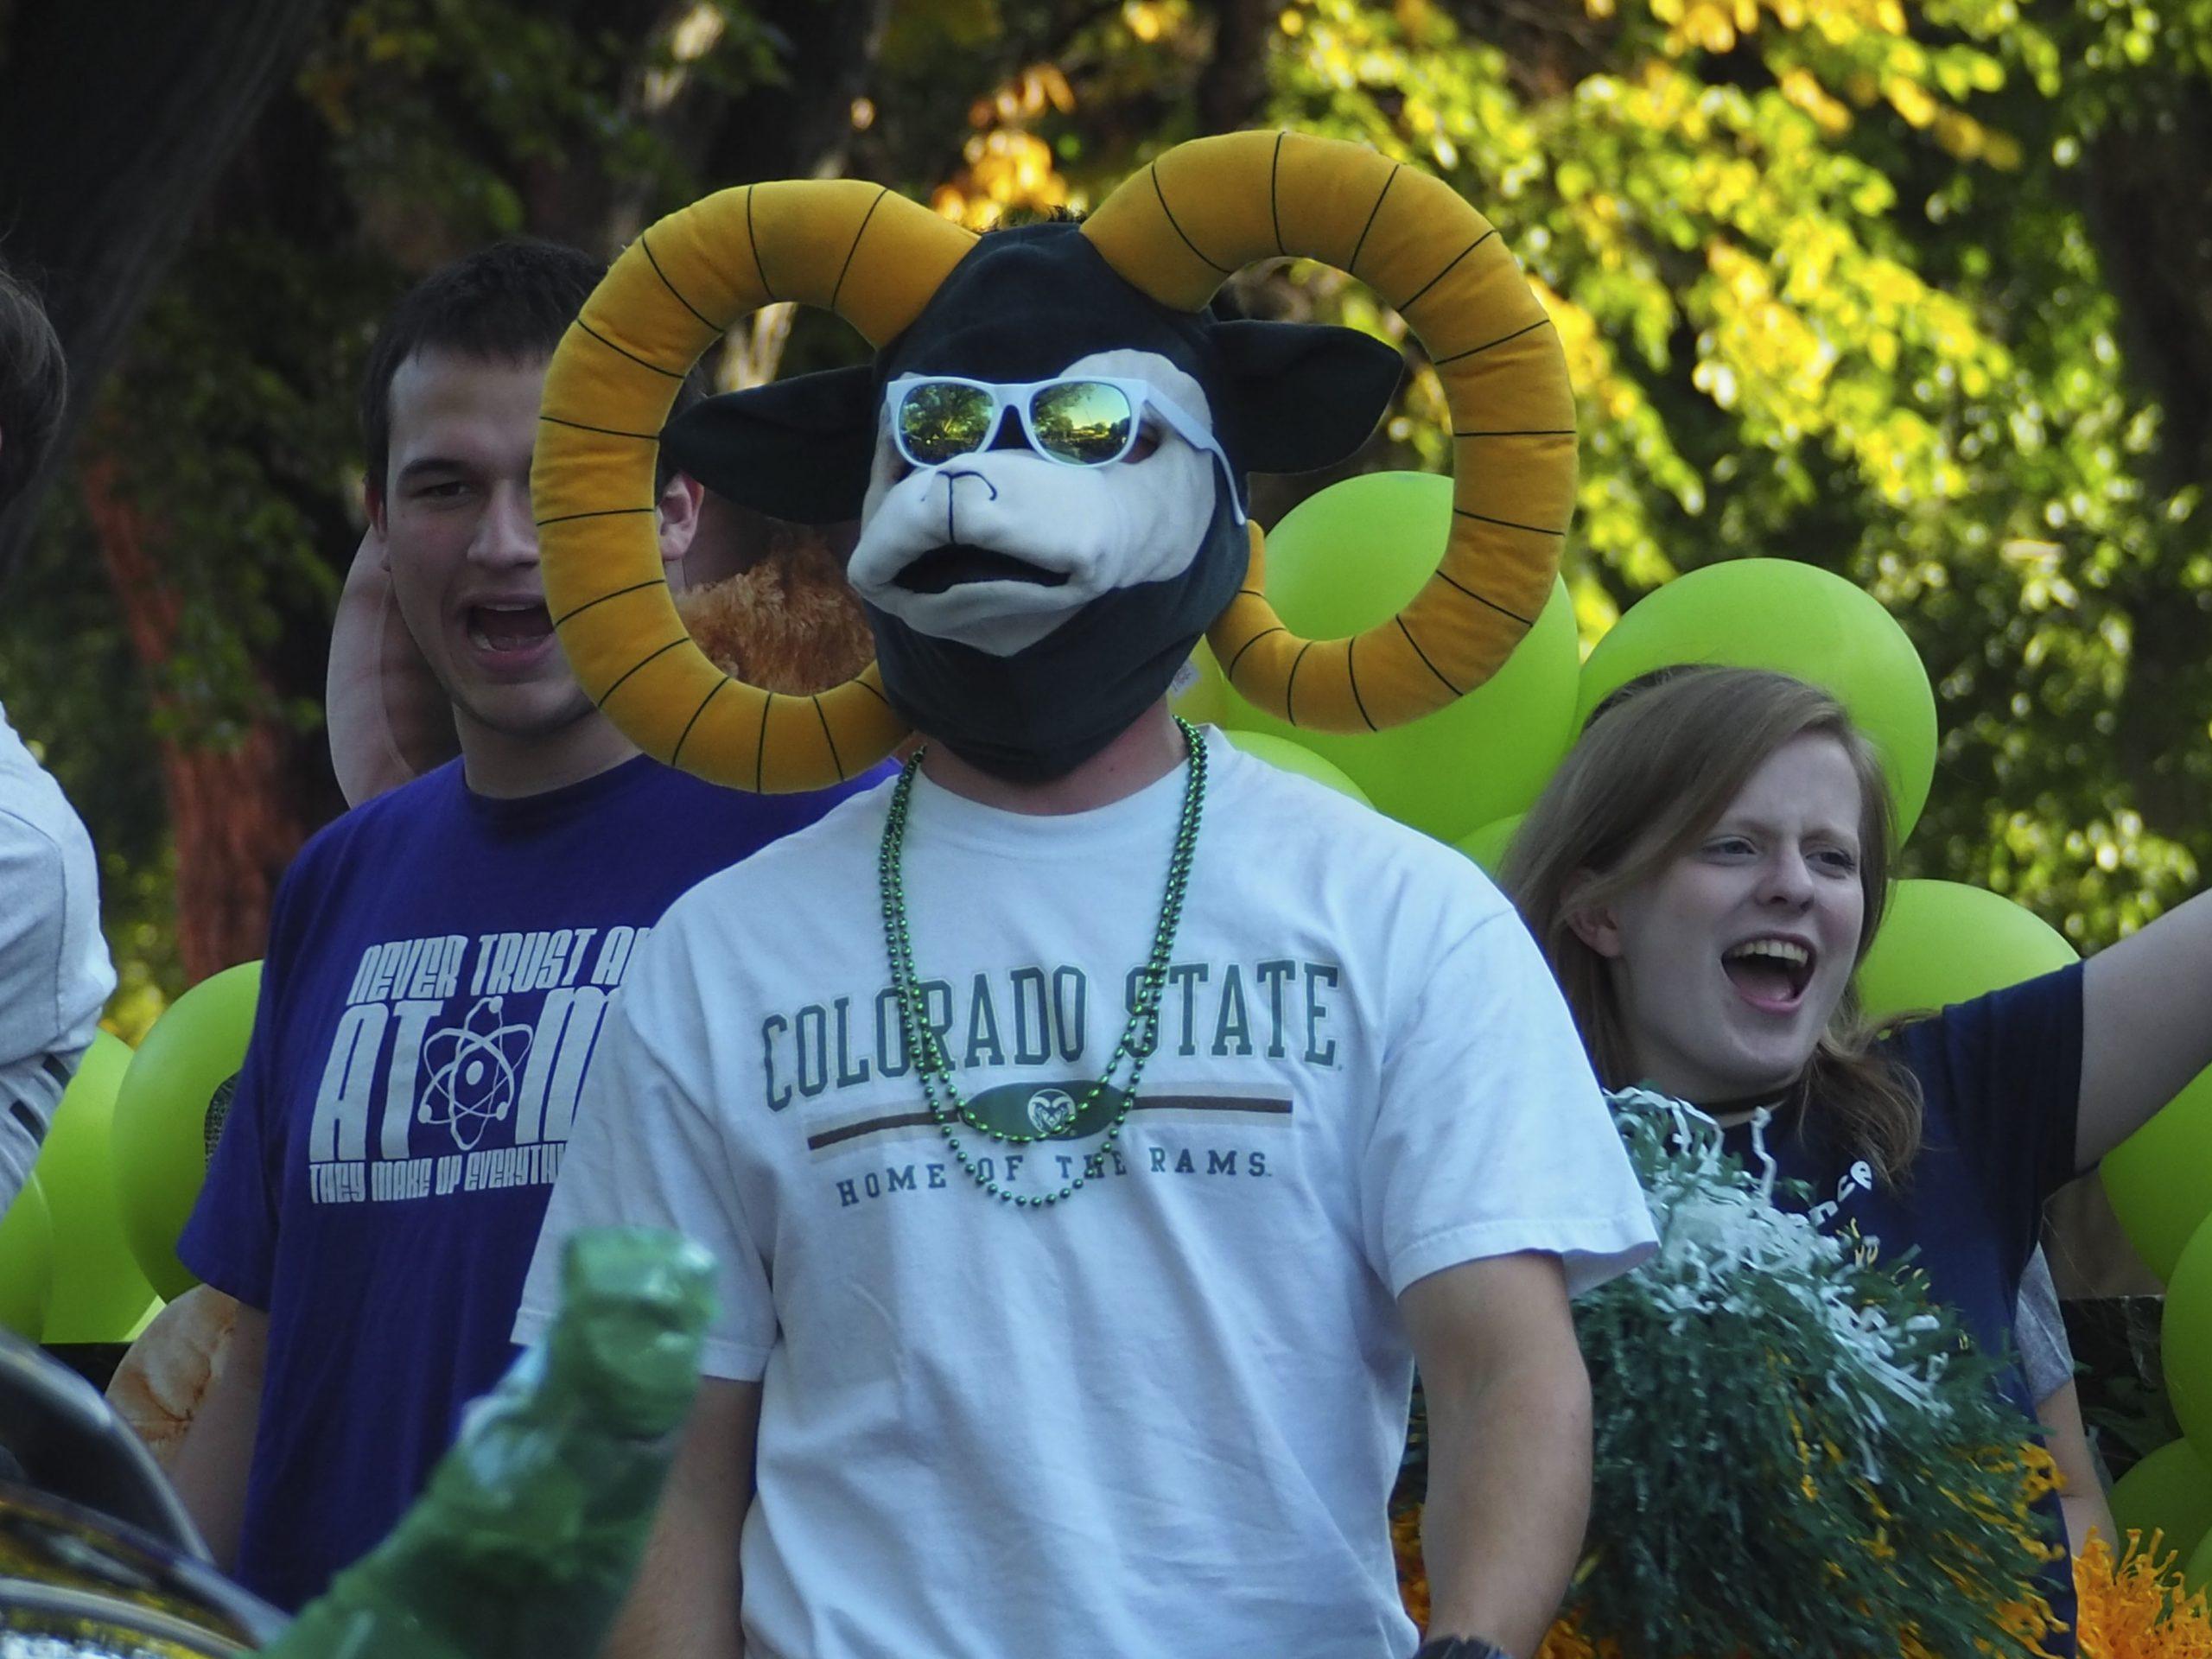 Homecoming+festivities+bring+fall+fun+to+Fort+Collins